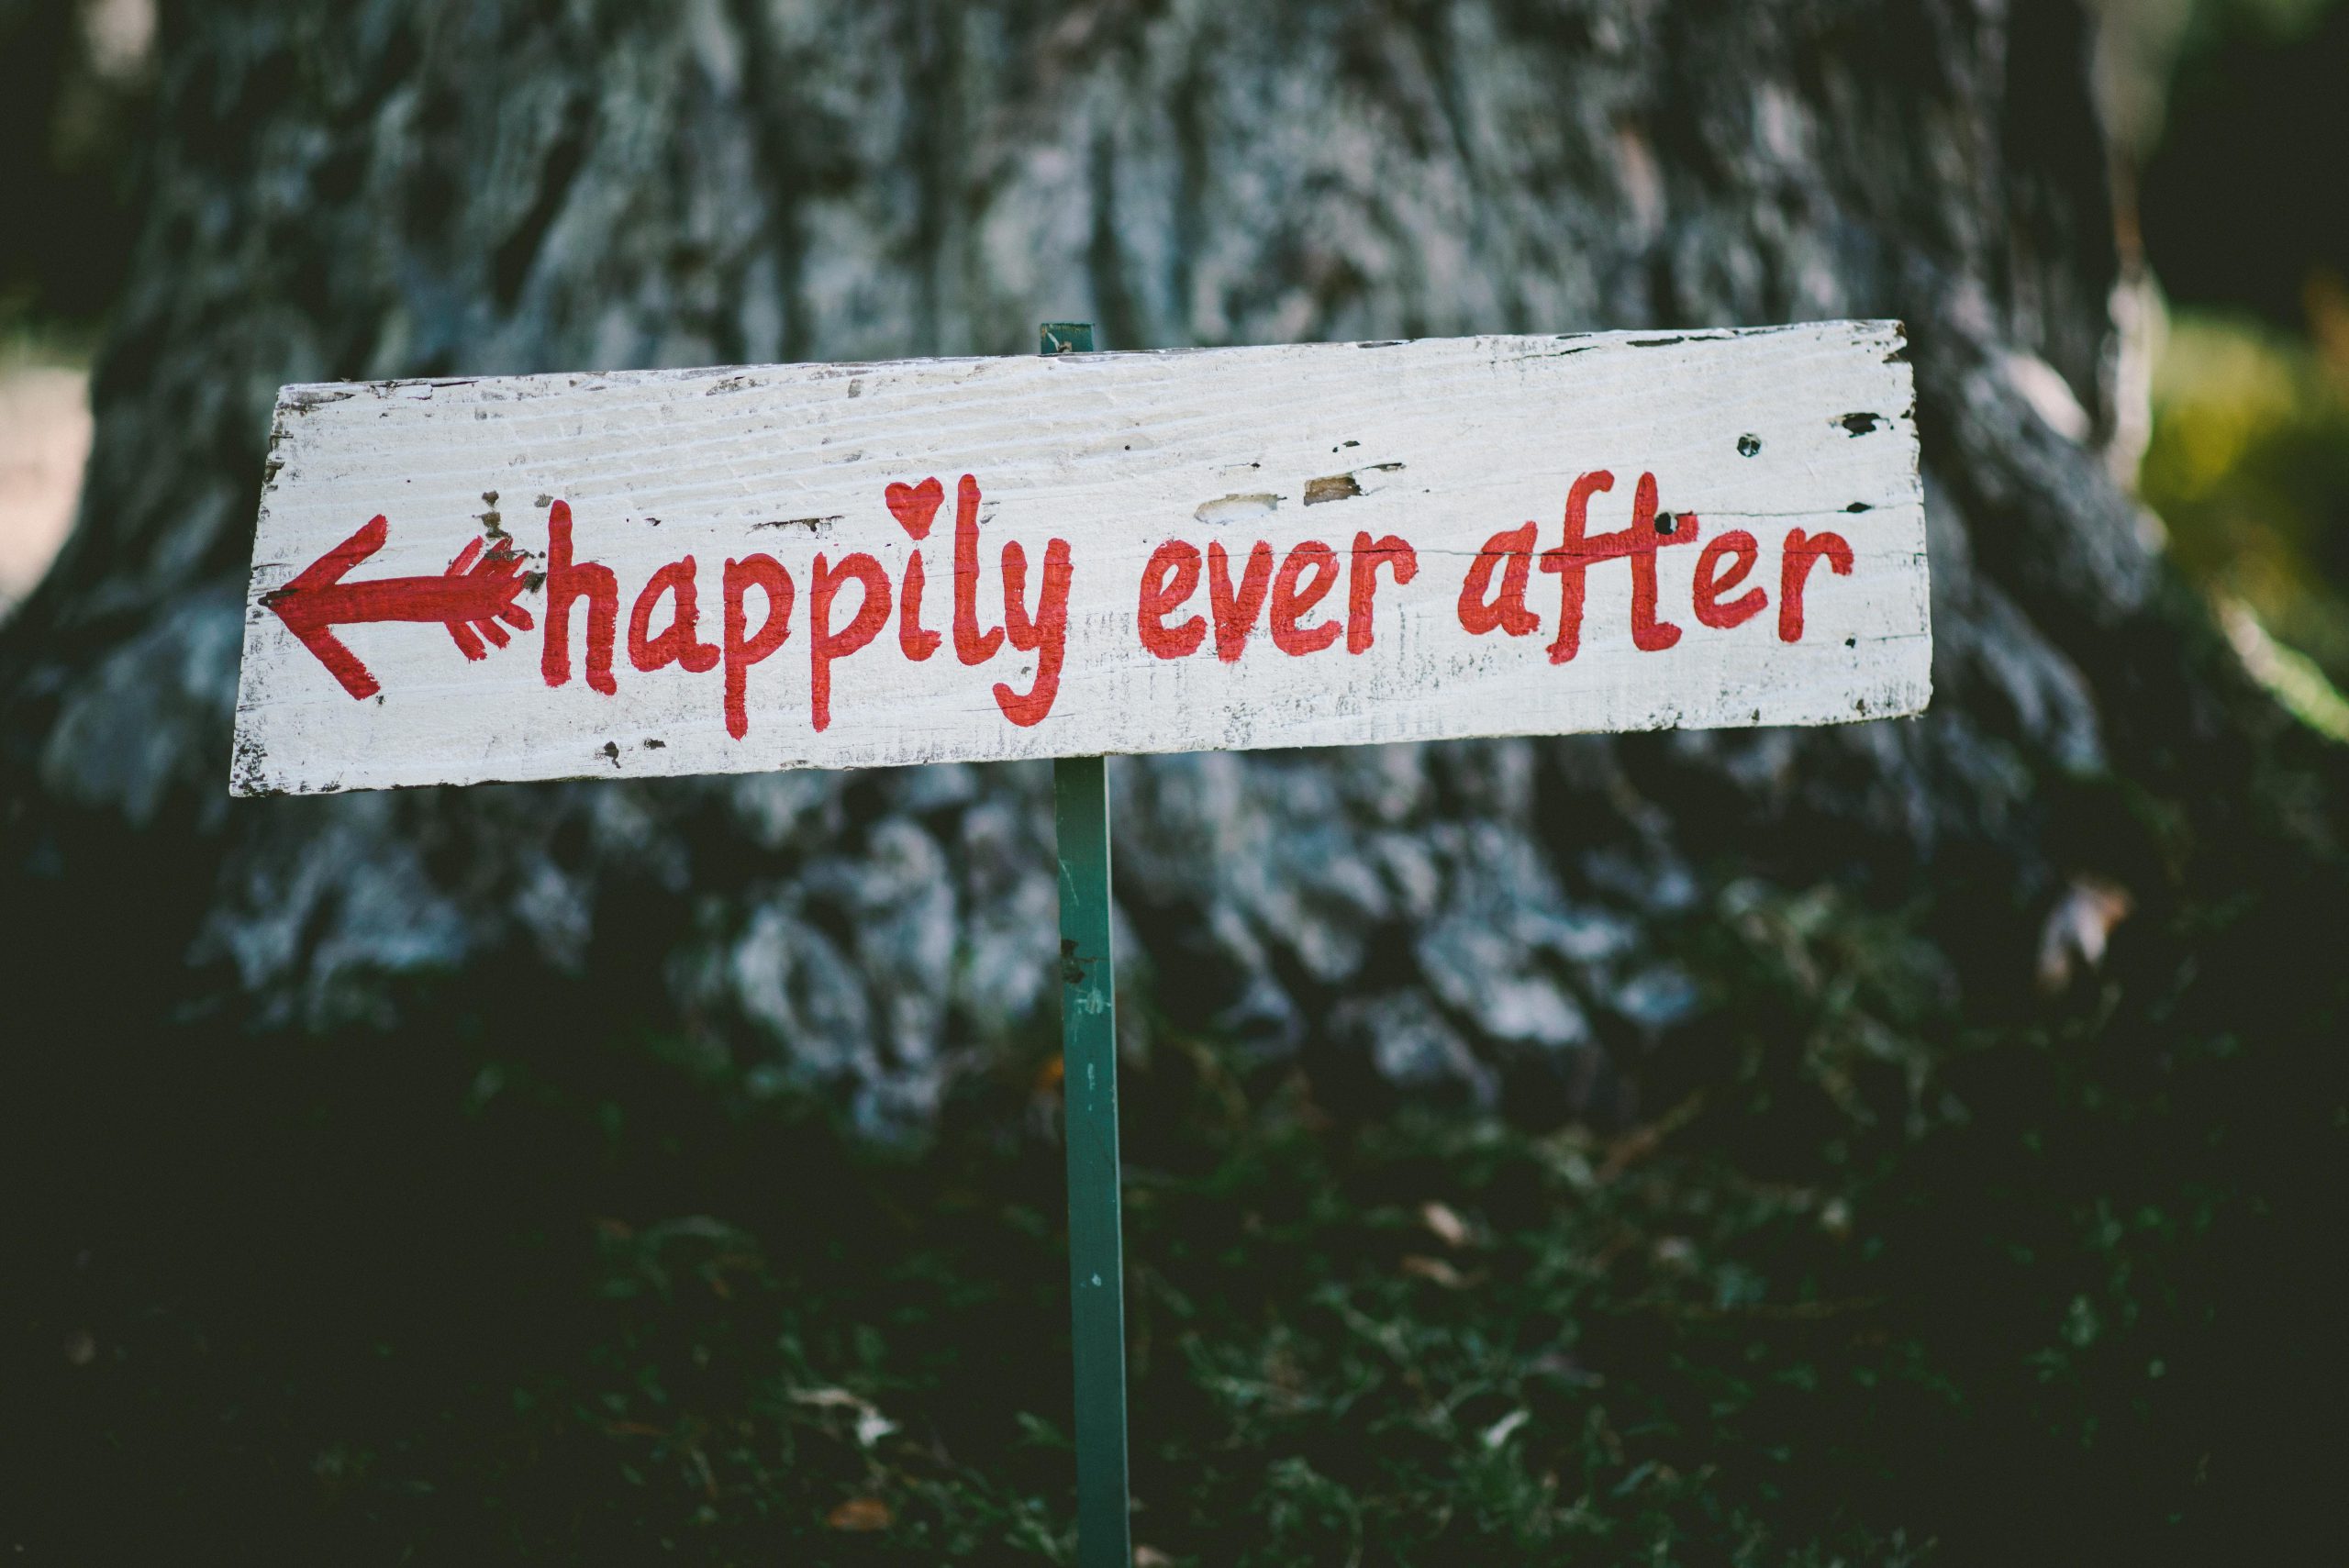 A wedding sigh reading happily ever after.